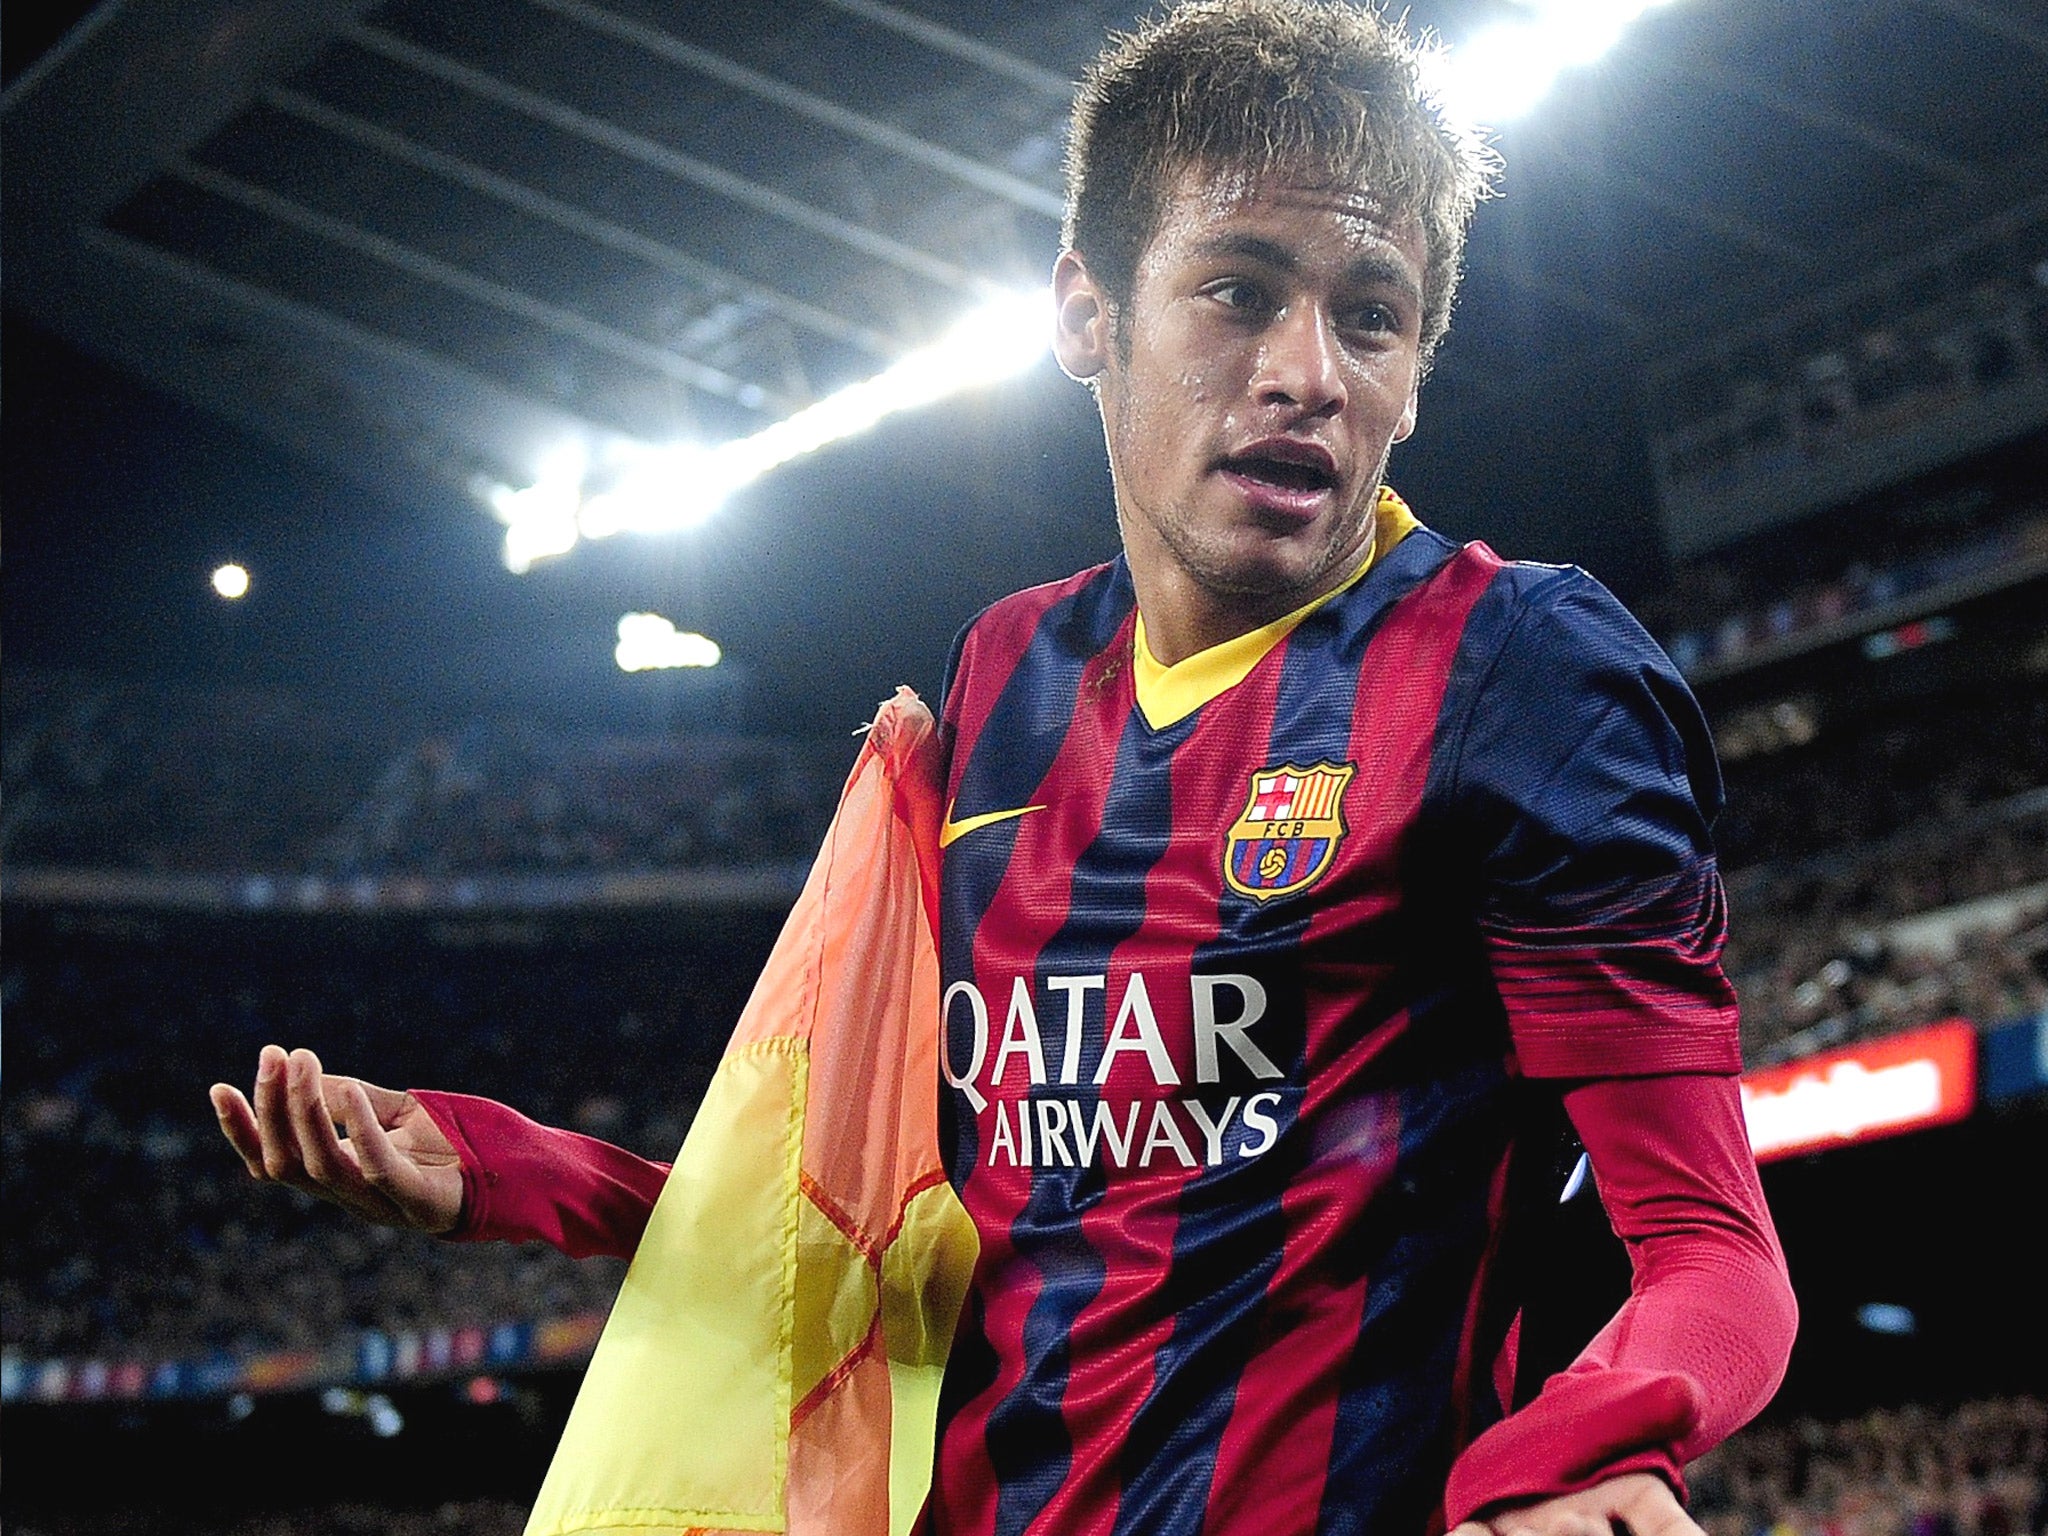 Neymar’s fee was originally quoted as €57m but a court has heard the true cost to Barça was €100m